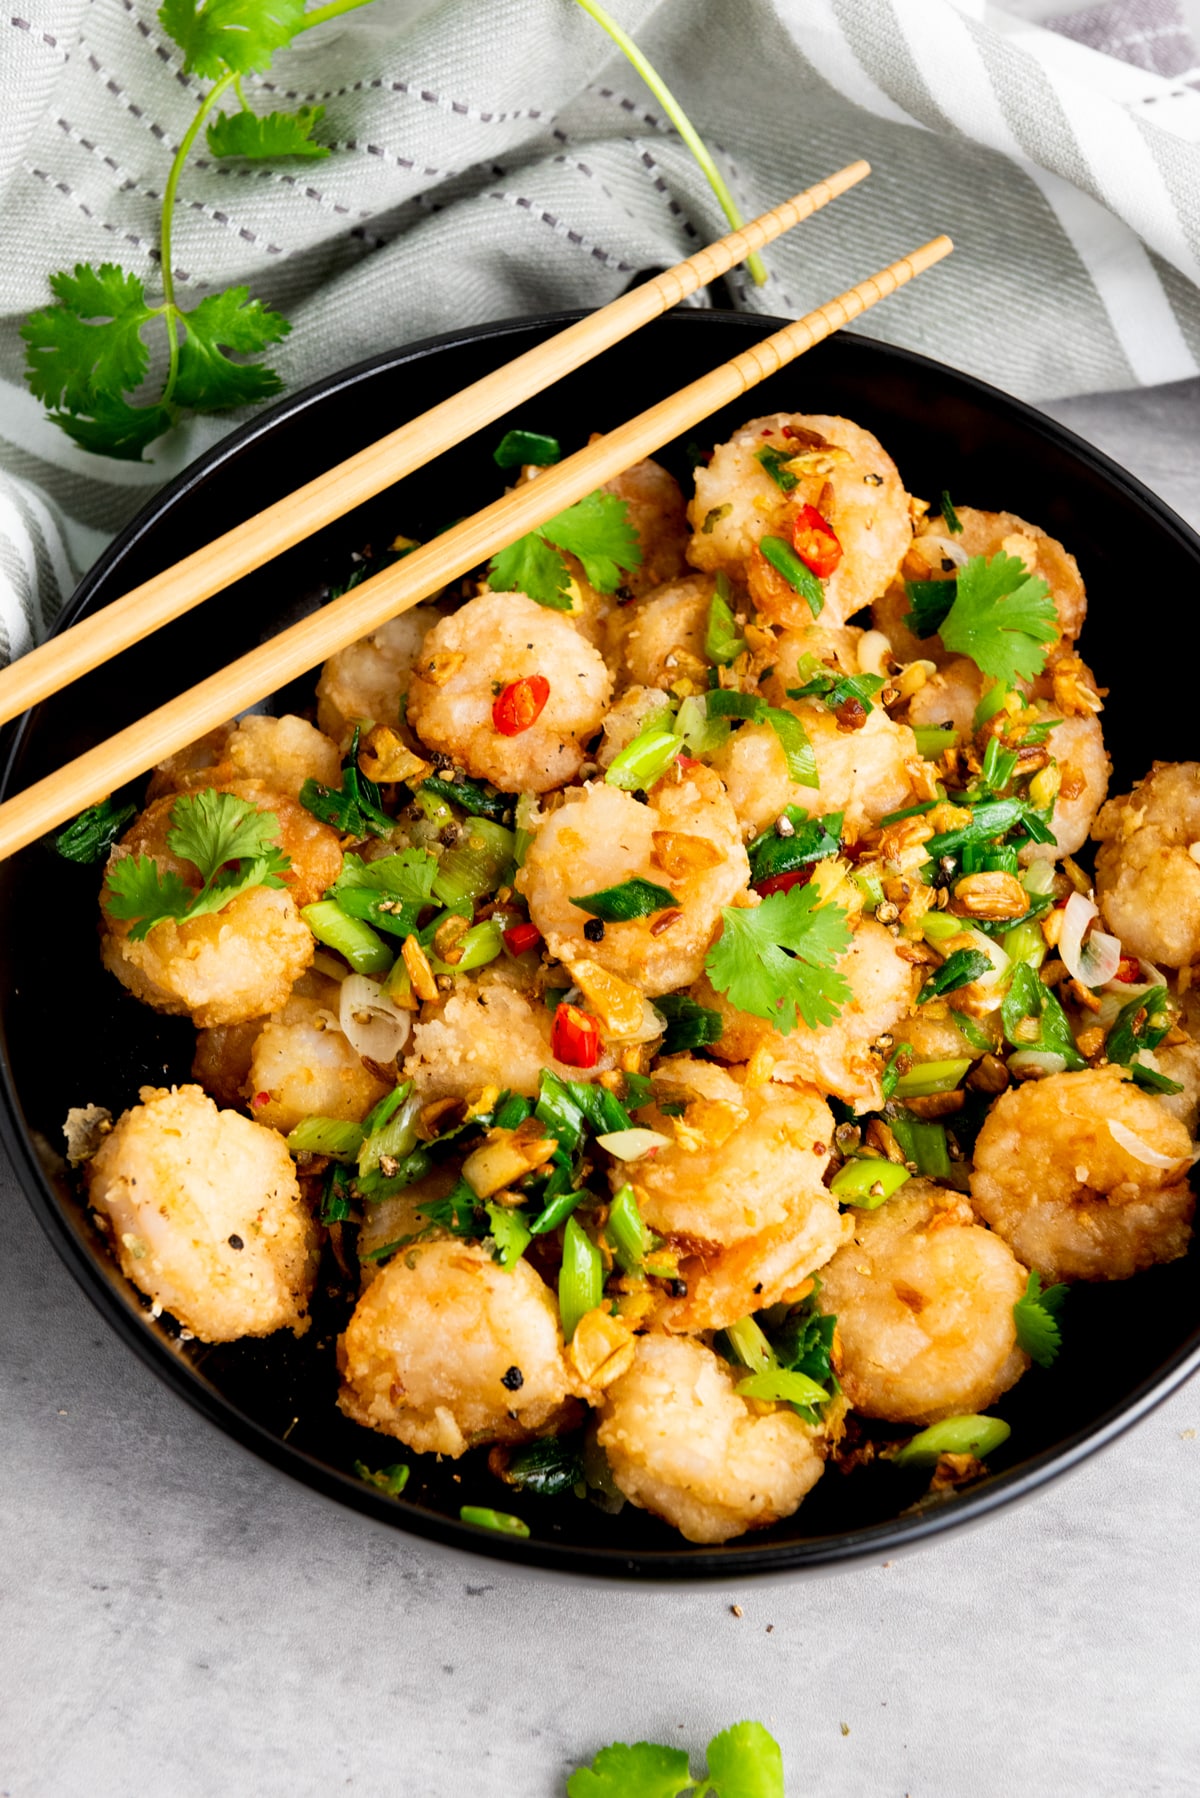 Chinese salt and pepper shrimp in a black bowl with sautéed vegetables and herbs, and a pair of chopsticks on top on a gray surface with a gray linen on the side.